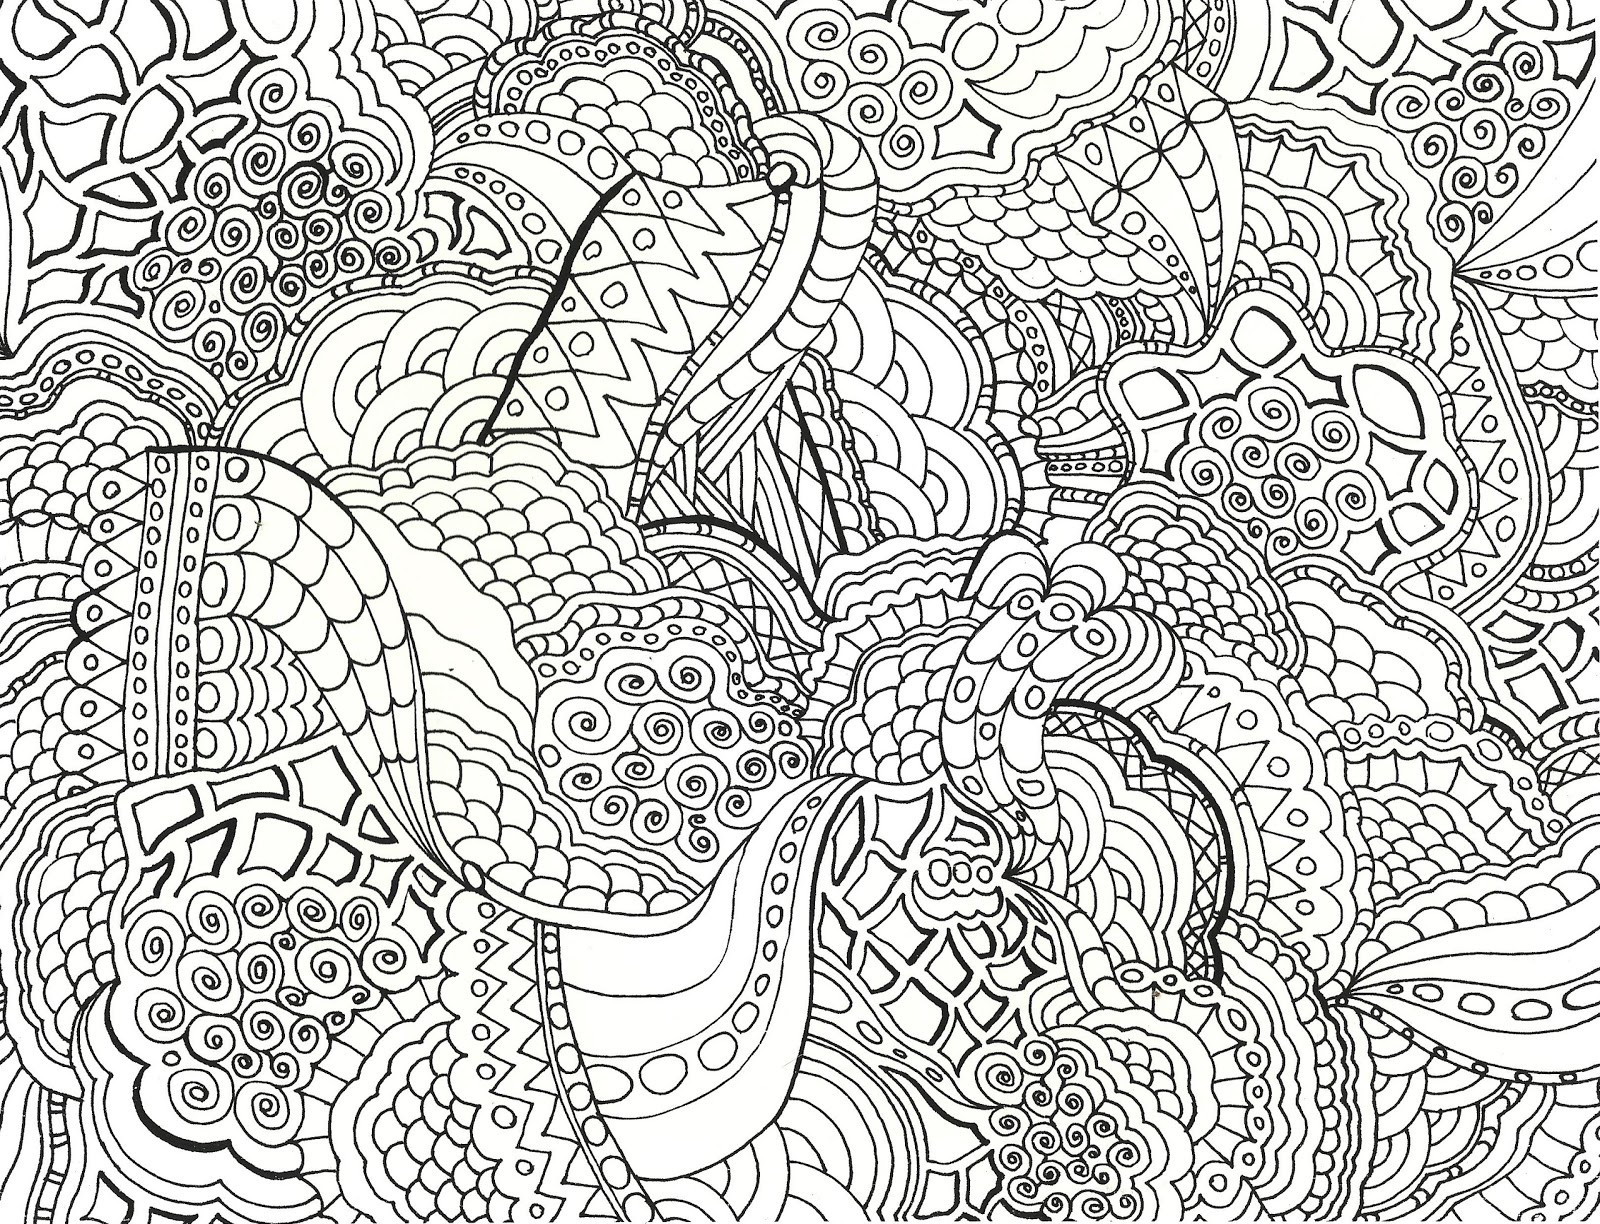 Difficult Coloring Pages For Adults
 byrds words Coloring Books for Grown ups